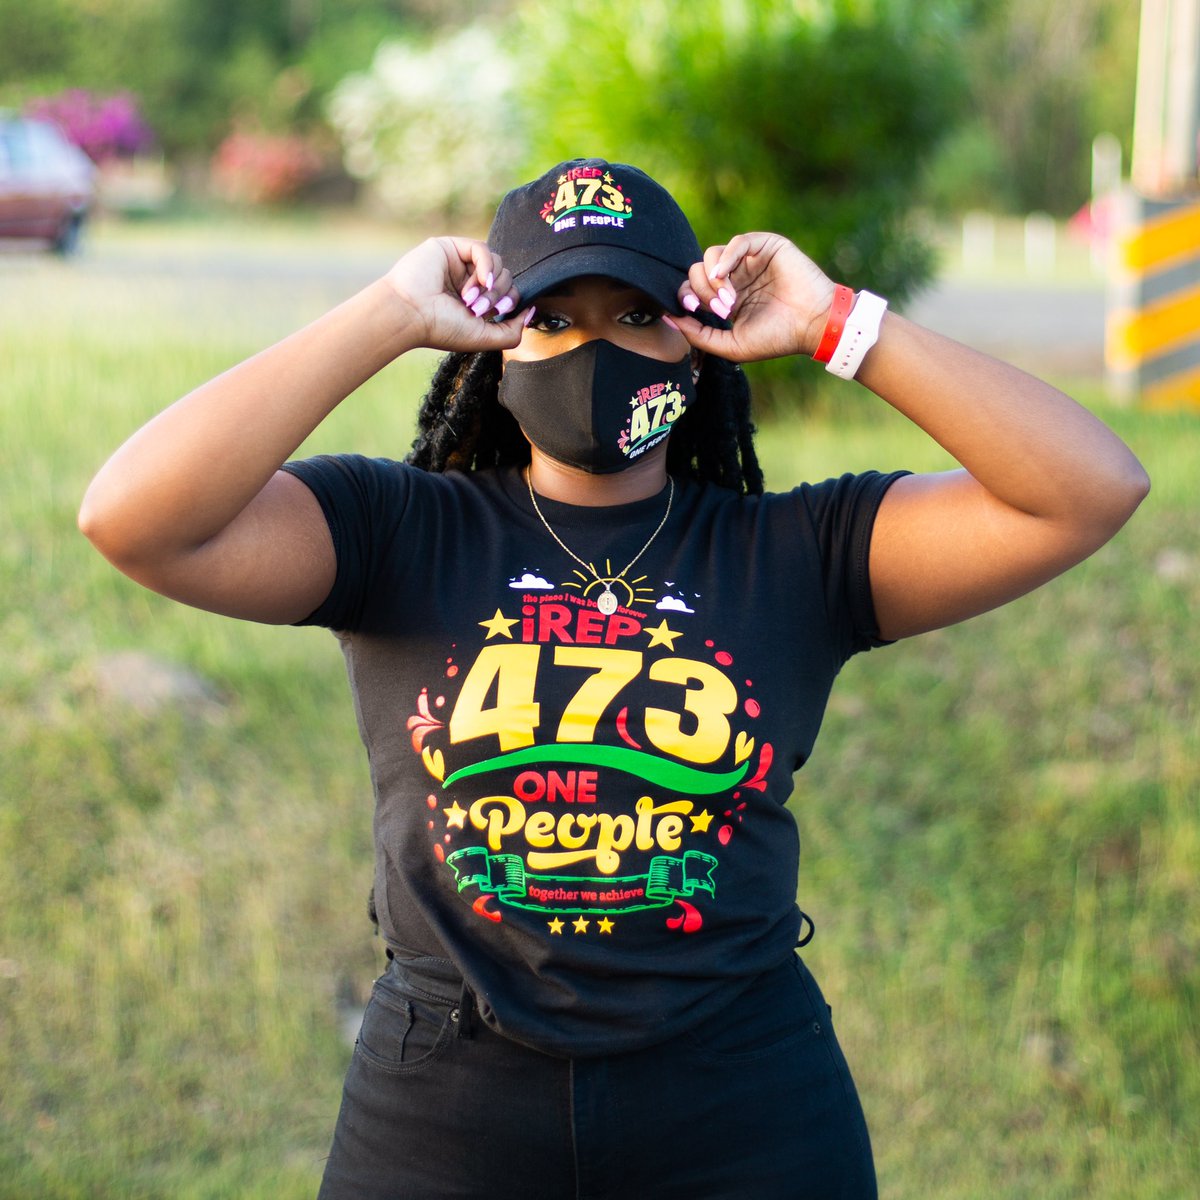 Stepping into your workplace on National Colors Day like : 

Mask 👌🏾
T-Shirt 👌🏾

#iRep473 #grenada #carriacou #petitemartinique #puregrenada #spiceisland #caribbean